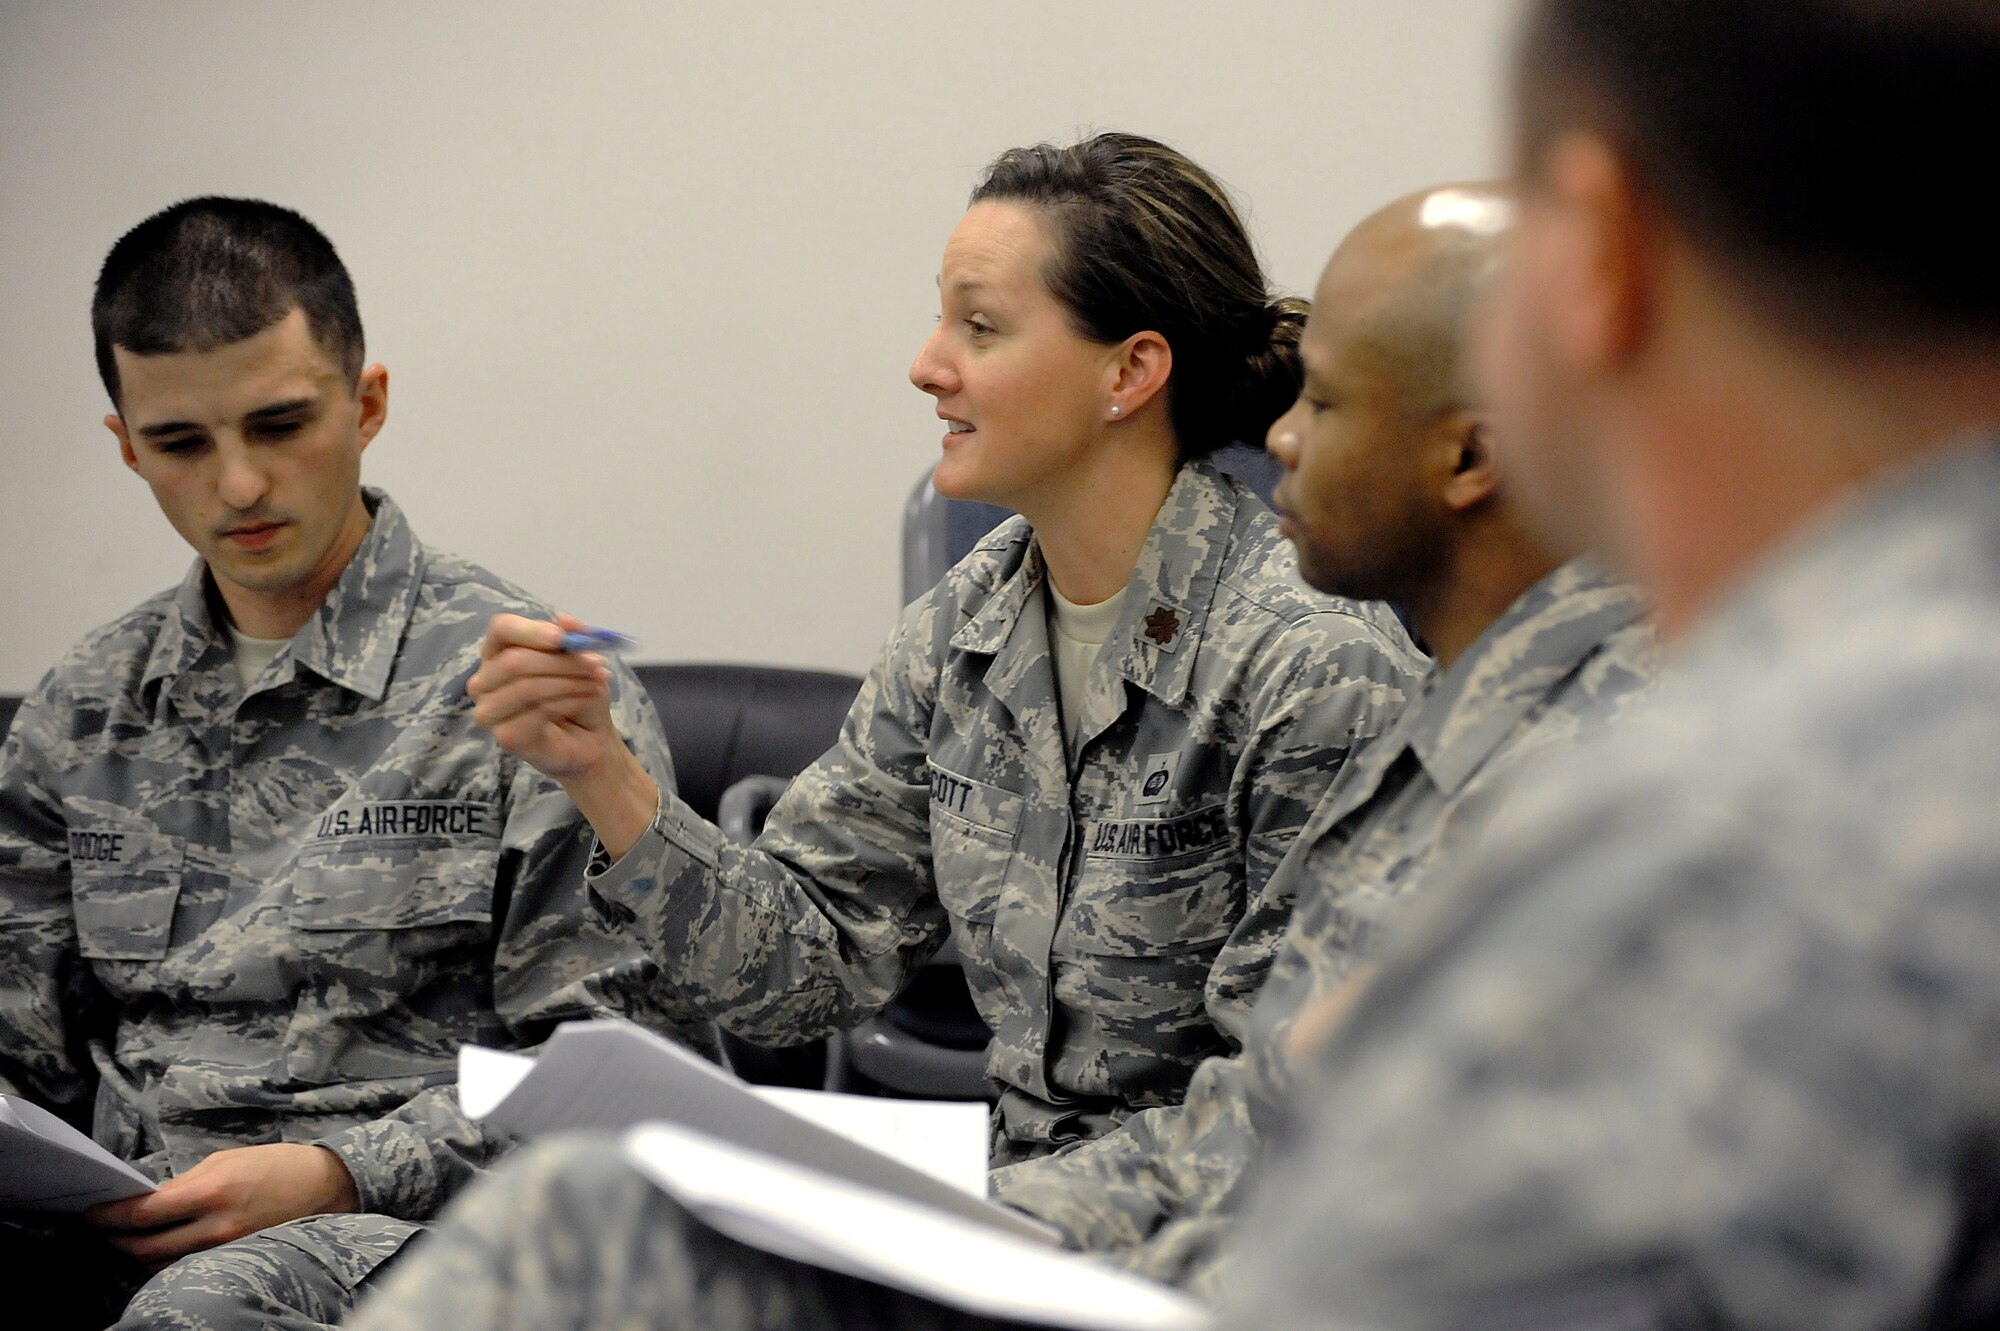 Oregon Air National Guard Maj. Lisa Scott, the Equal Opportunity Director for the 142nd Fighter Wing, center, leads a discussion during the Unit Training Assembly, Dec. 07, 2014, Portland Air National Guard Base, Ore. The Diversity and Inclusion Counsel meets during Unit Training Assembly weekends to help develop the total force crucial for mission success. (U.S. Air Force photo by Tech. Sgt. John Hughel, 142nd Fighter Wing Public Affairs/Released)